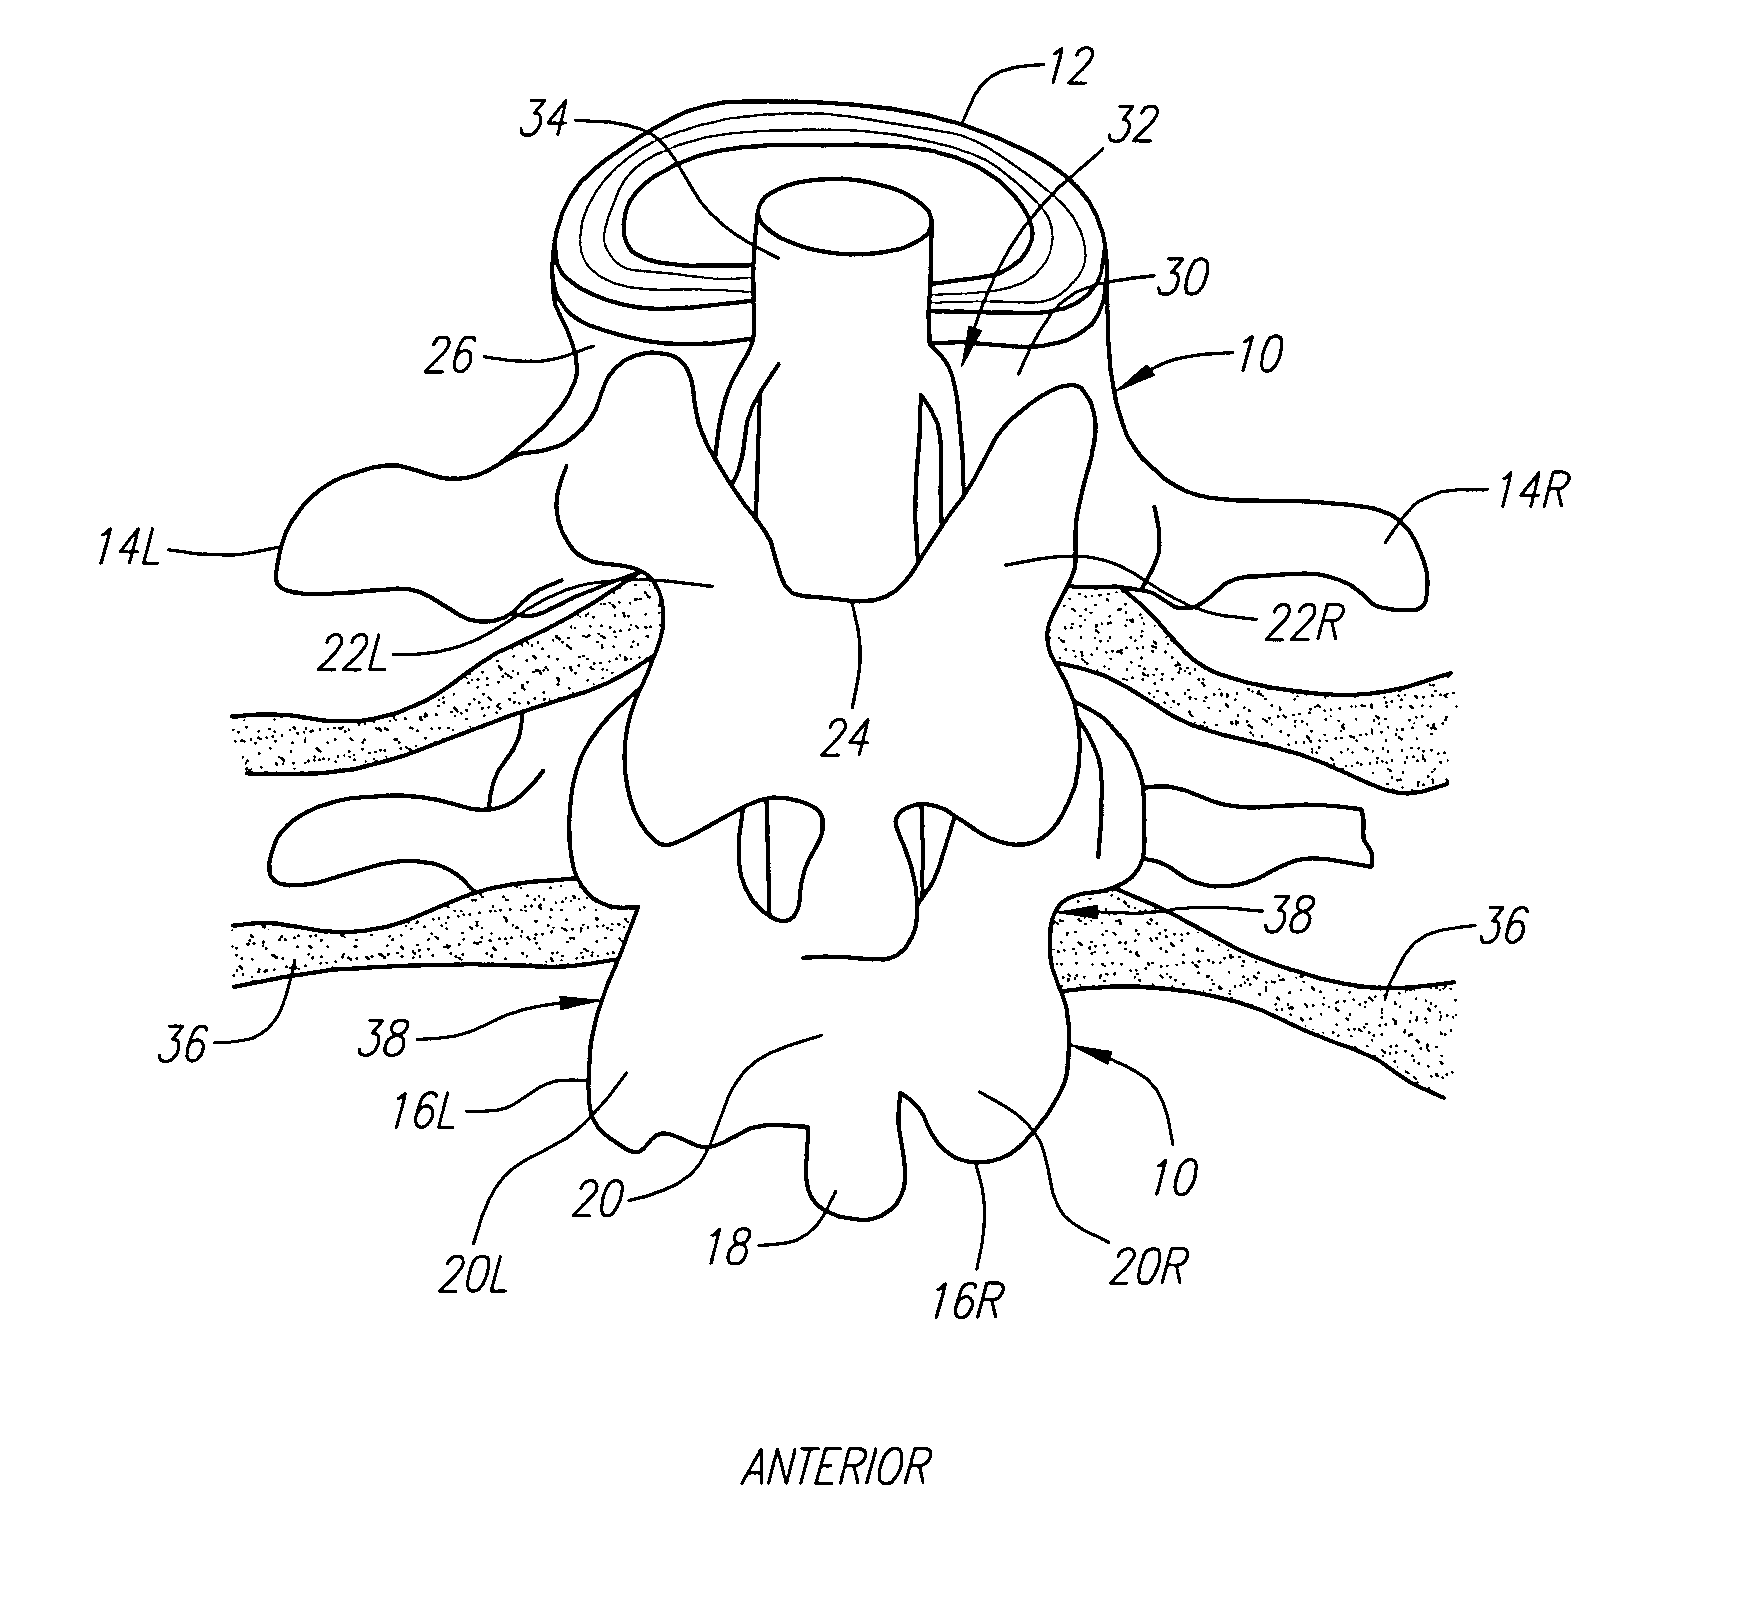 Radially adjustable tissue removal device